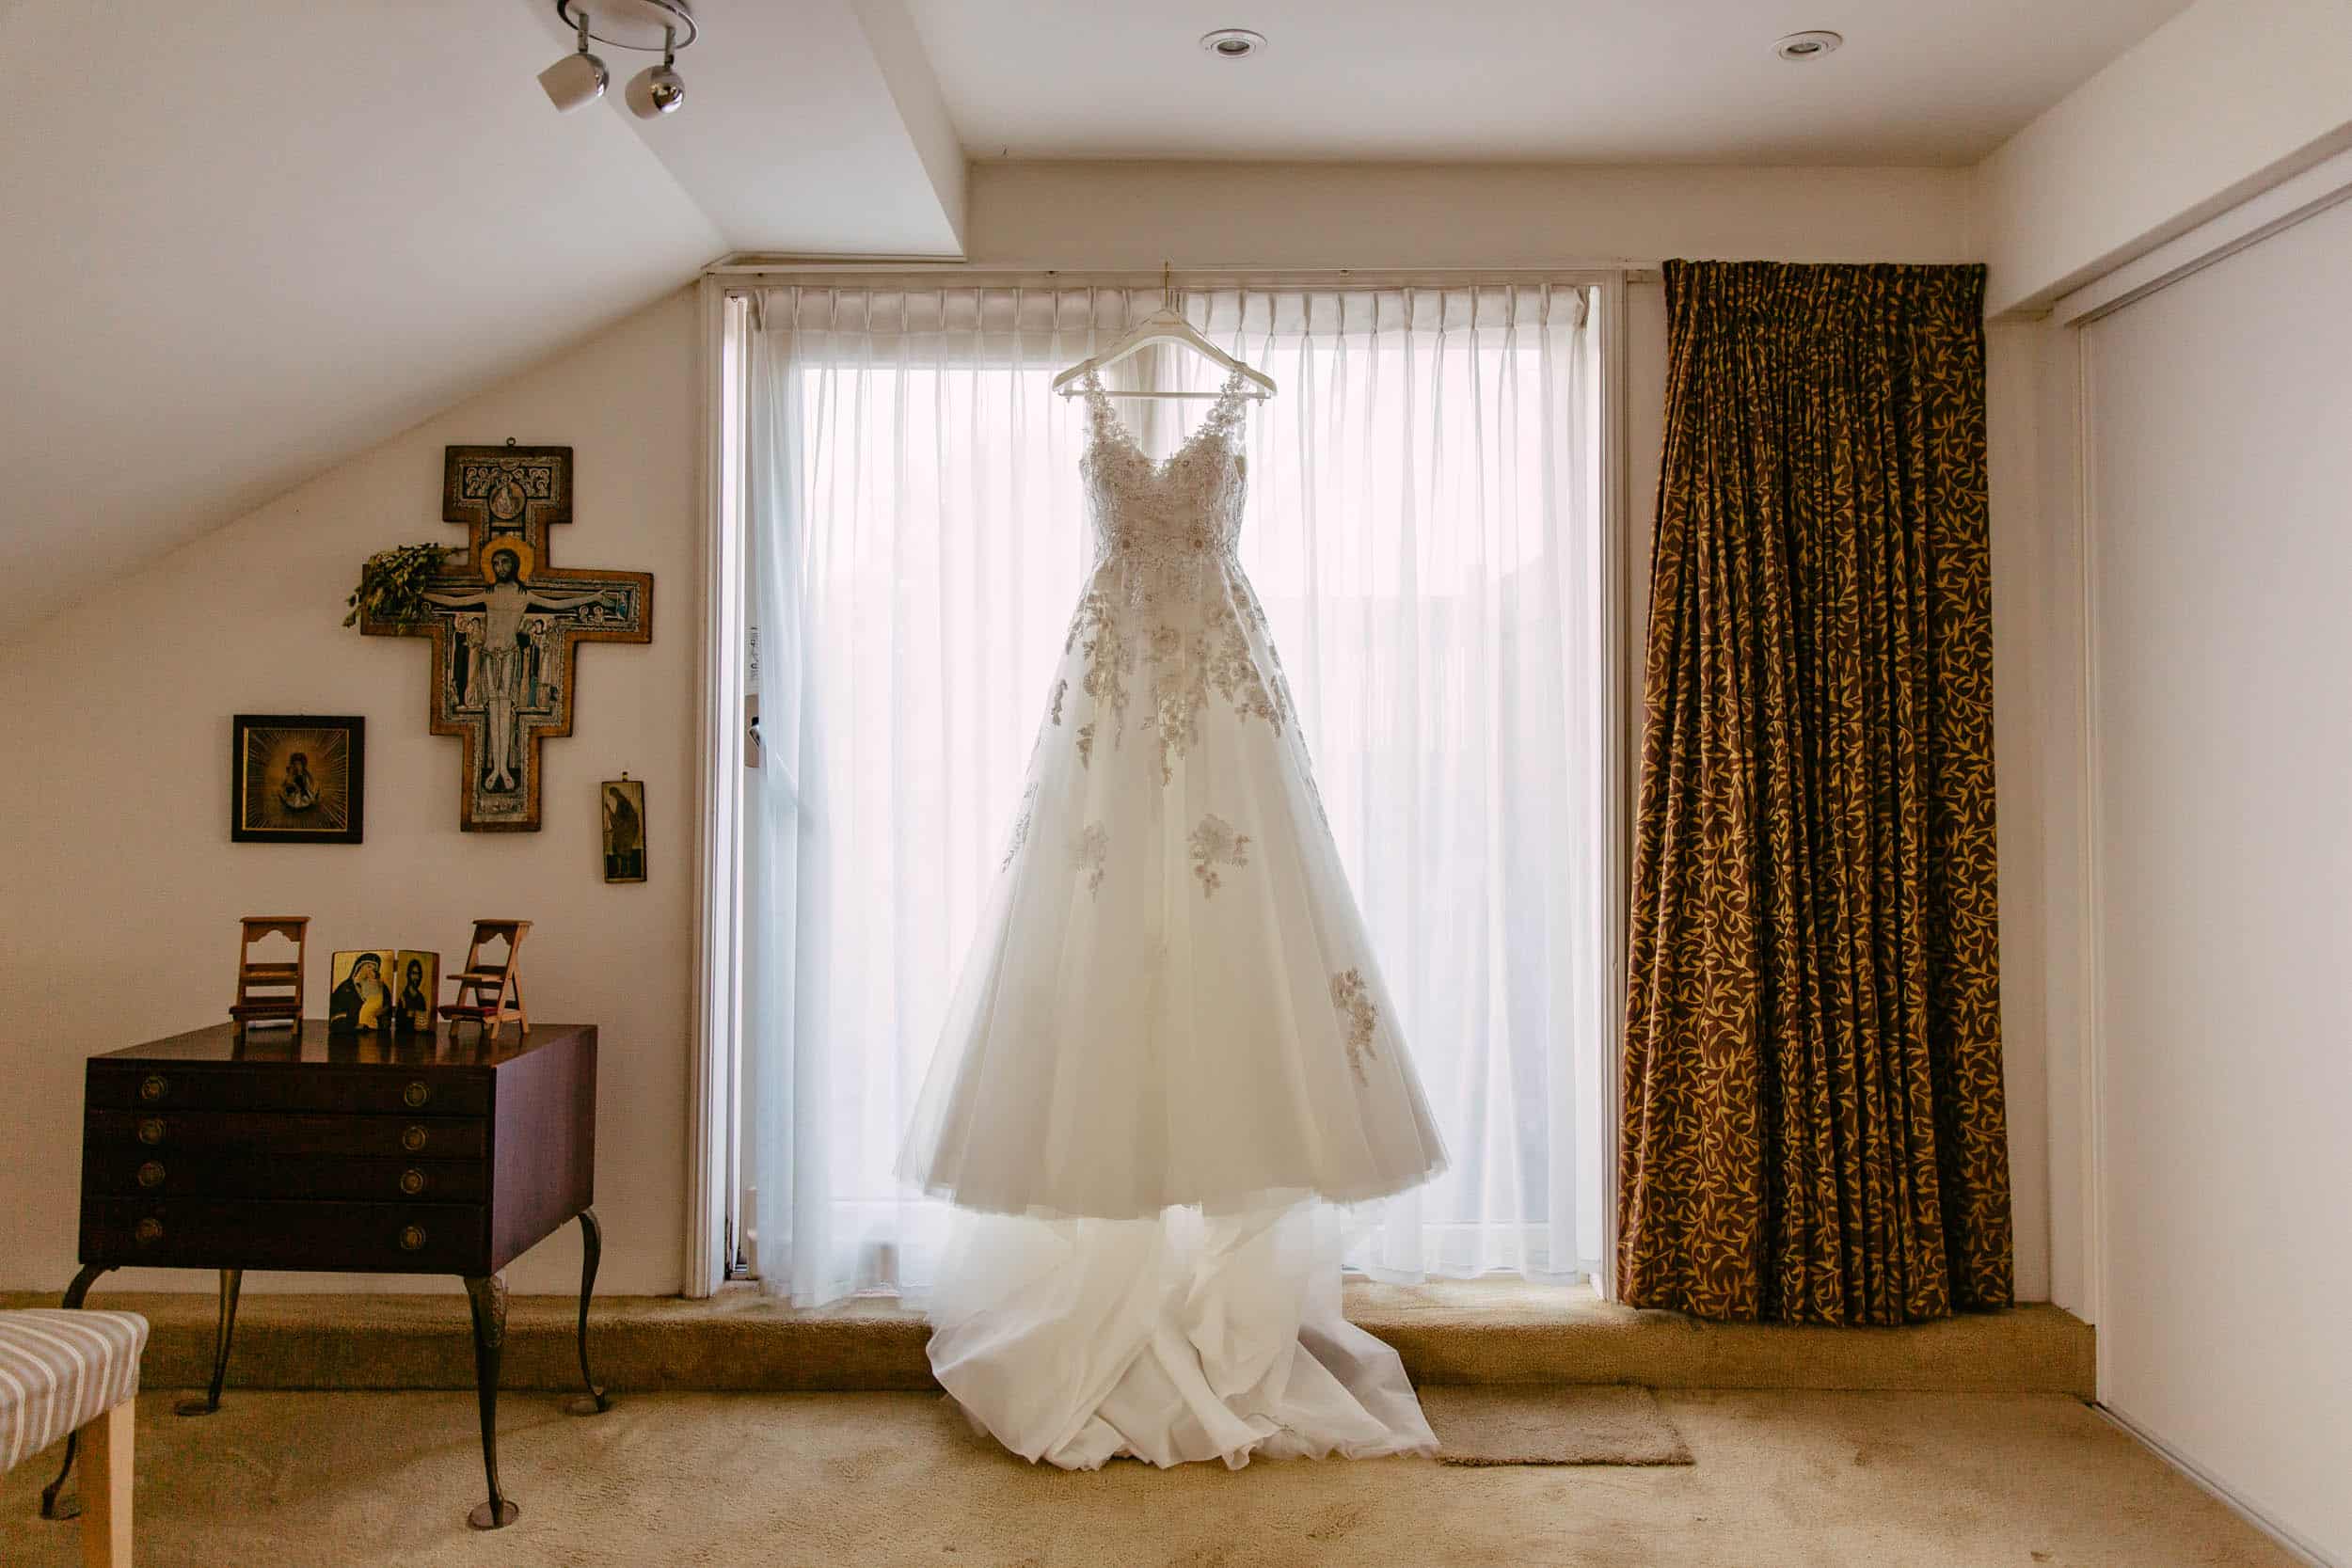 A wedding dress from a botanical garden, hanging in a room with a window in Delft.